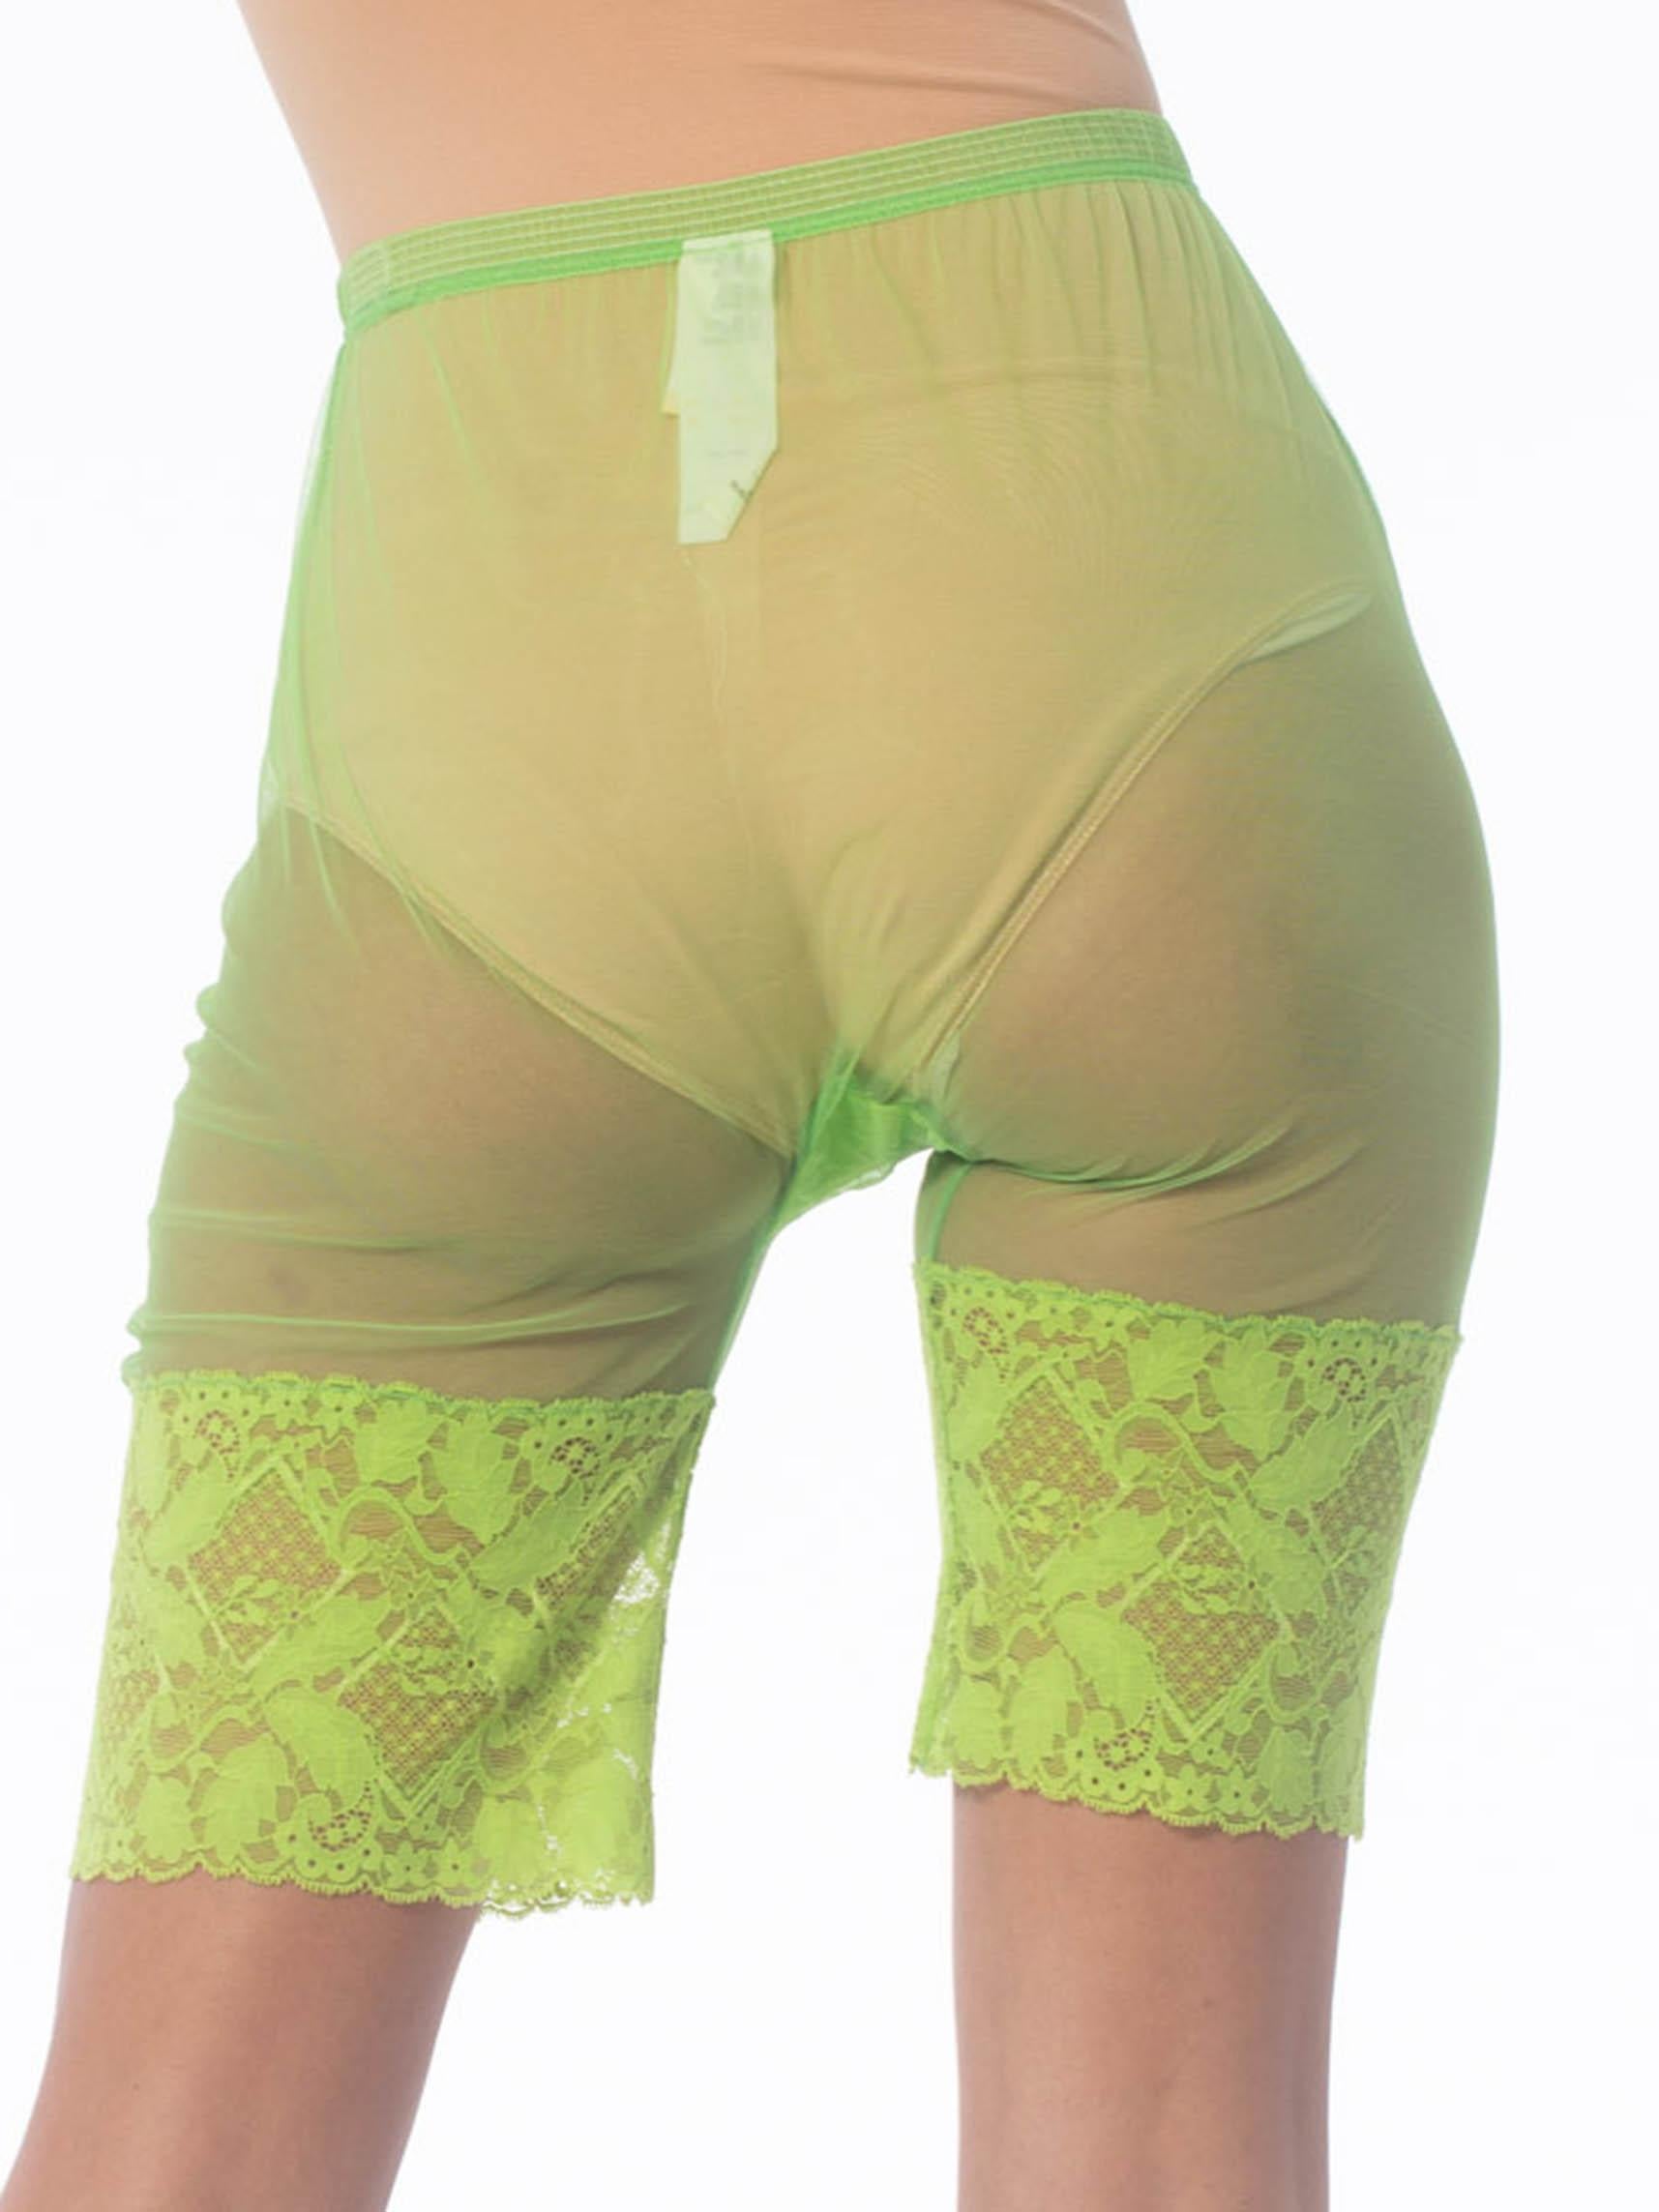 1990S GIANNI VERSACE Lime Green Nylon Net Sheer Bike Shorts With Lace Hem In Excellent Condition For Sale In New York, NY